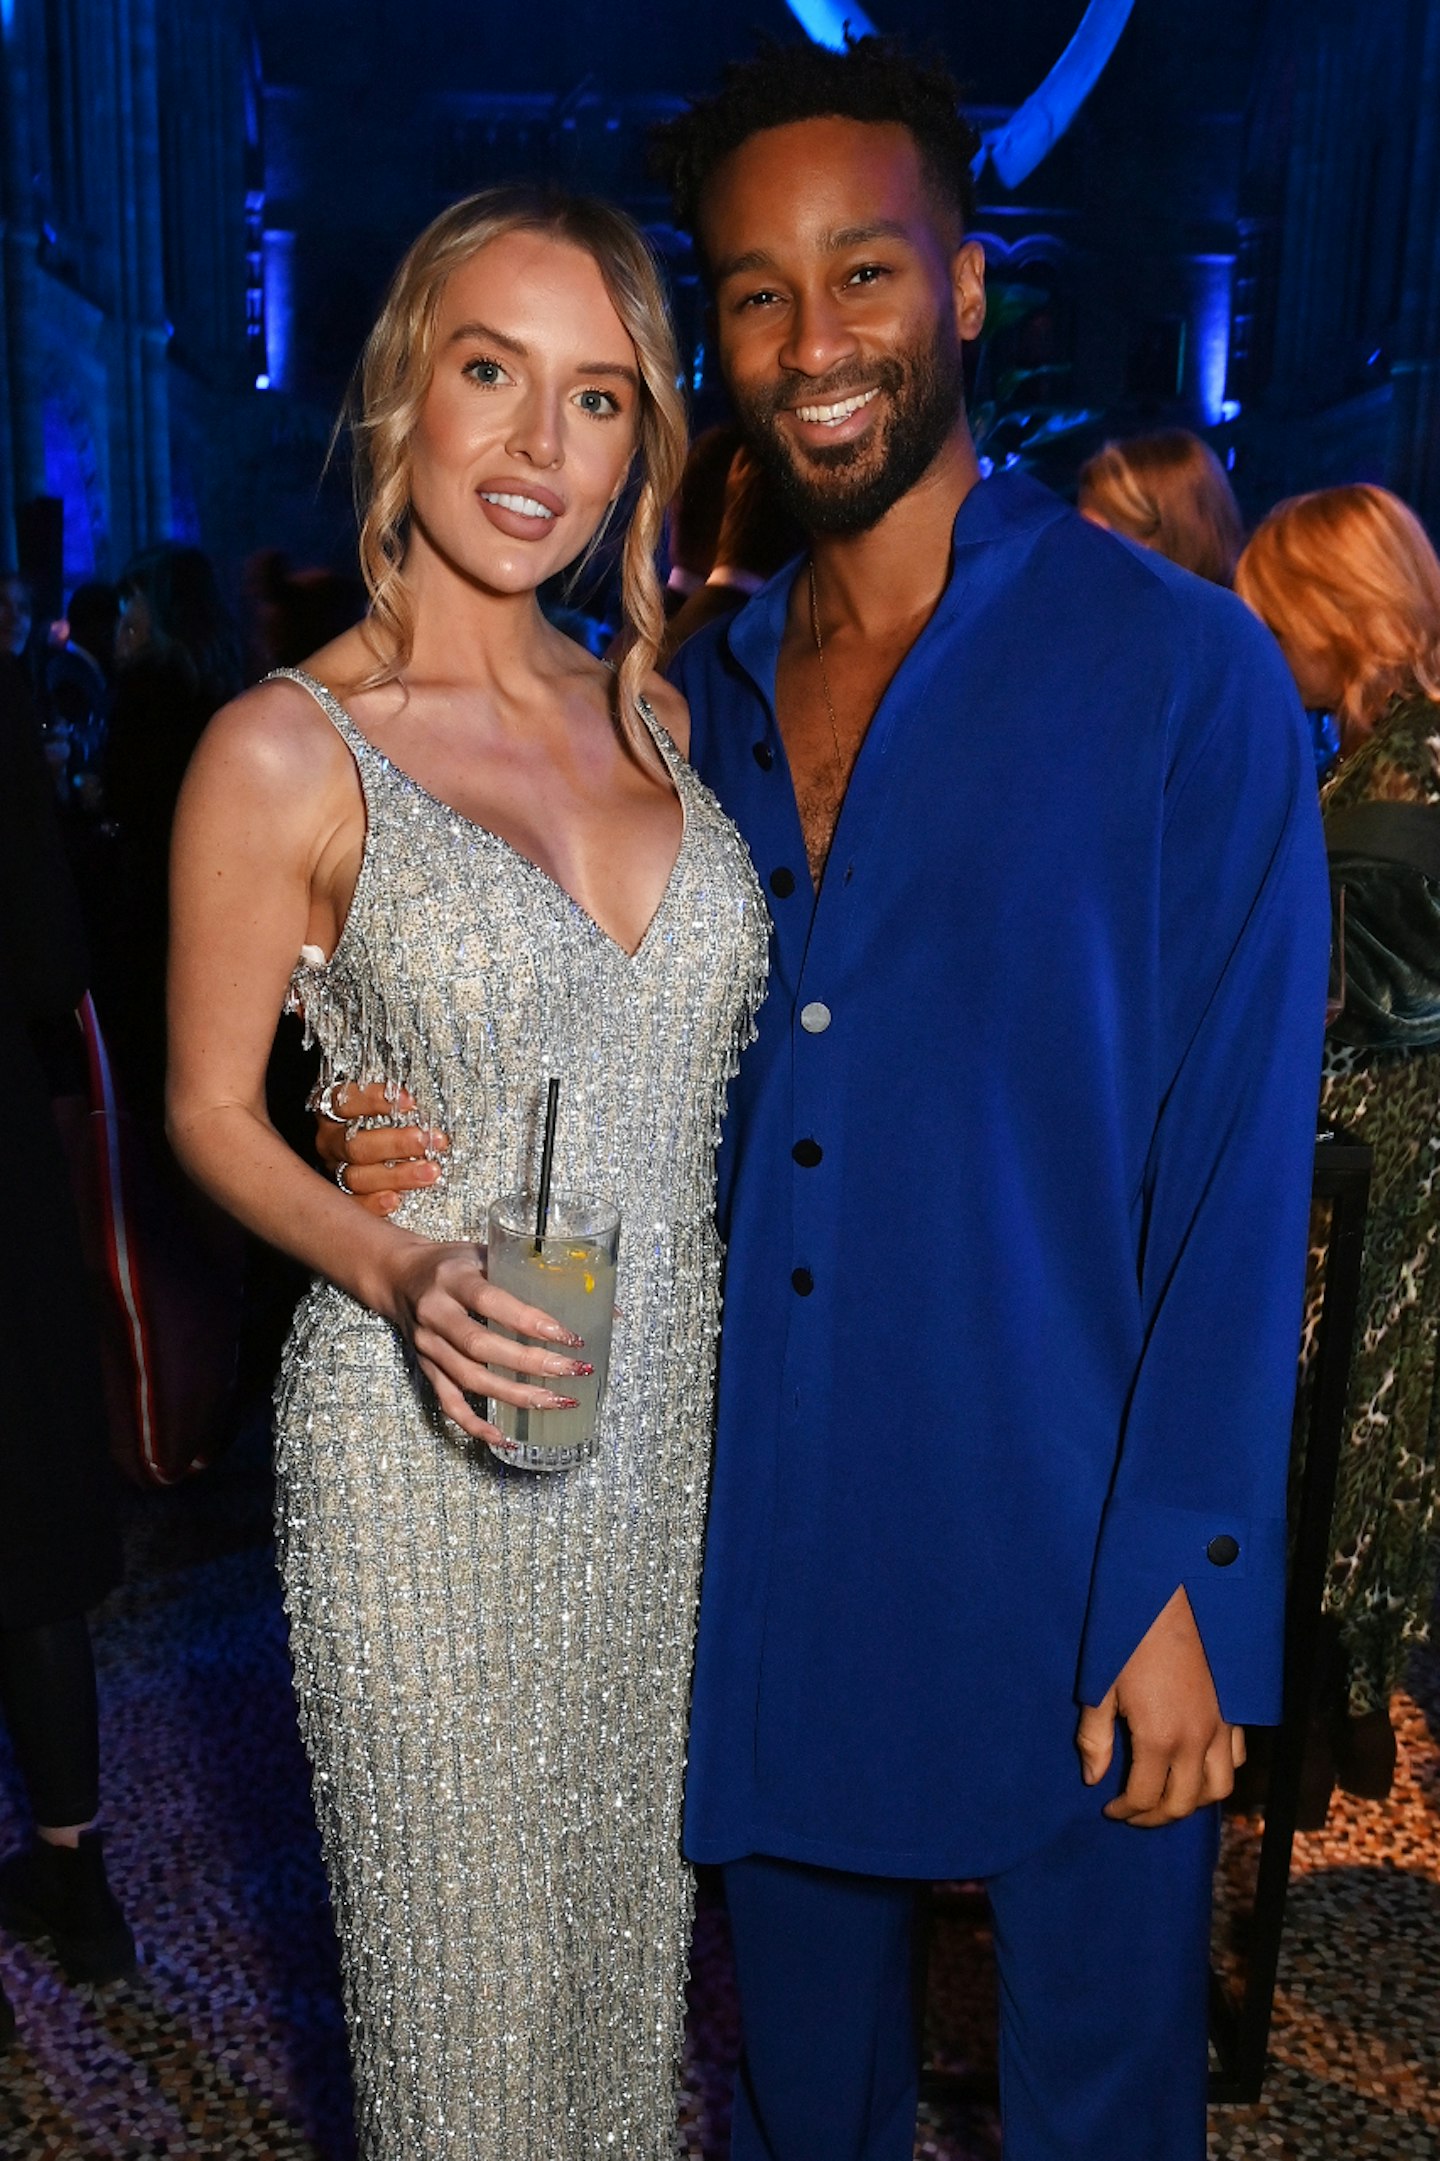 Faye Winter and Teddy Soares at the Avatar: The Way Of Water World Premiere Afterparty